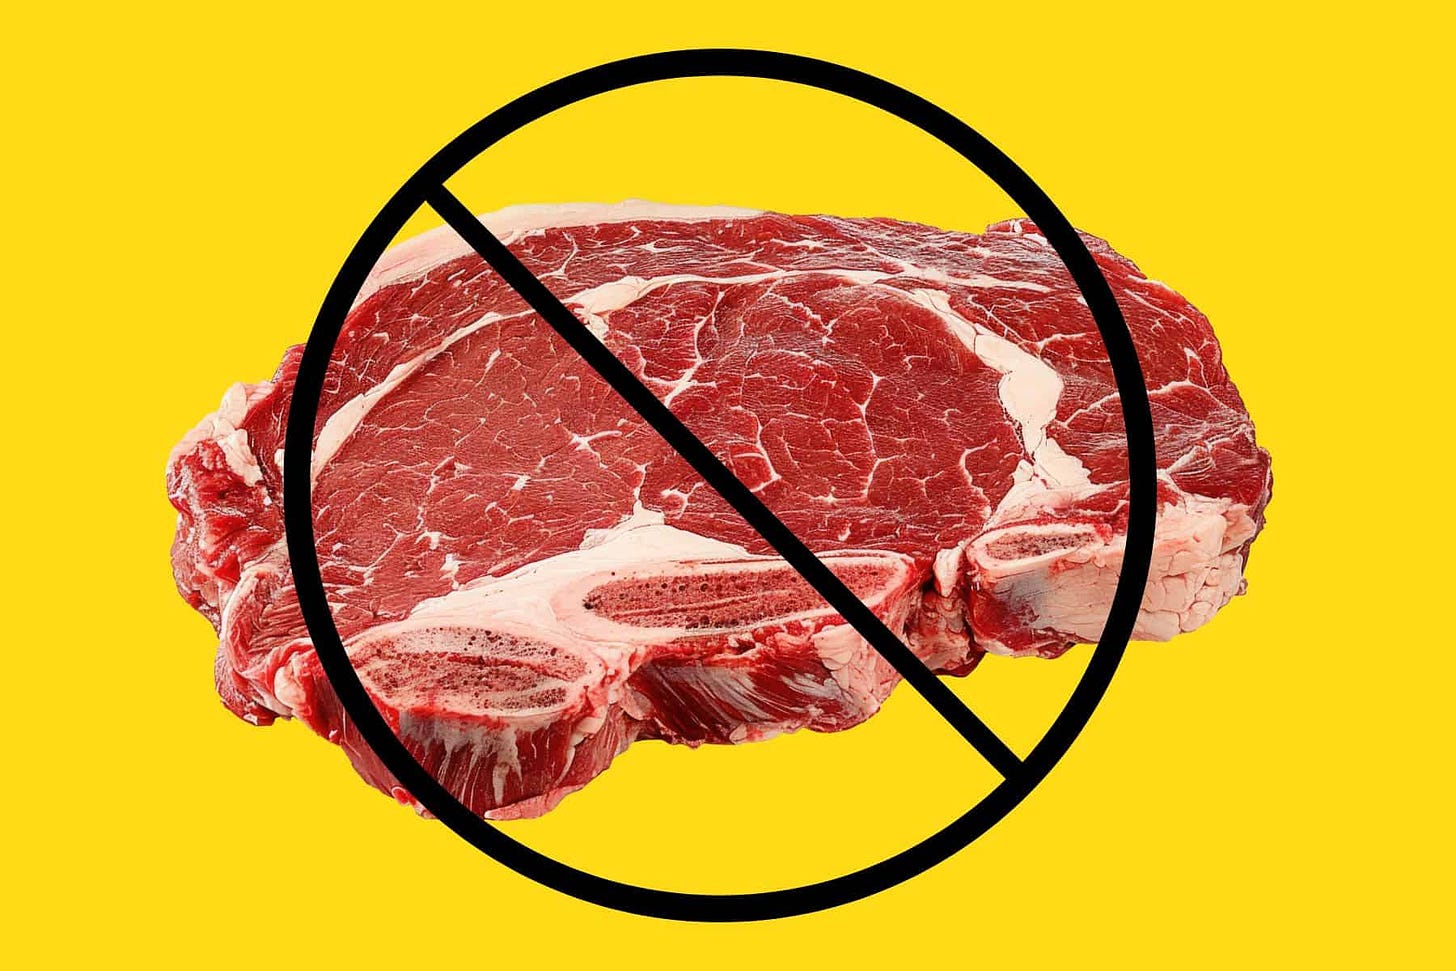 Florida Becomes First State to Ban Cultivated Meat as Governor Says “Take Your Fake Lab-Grown Meat